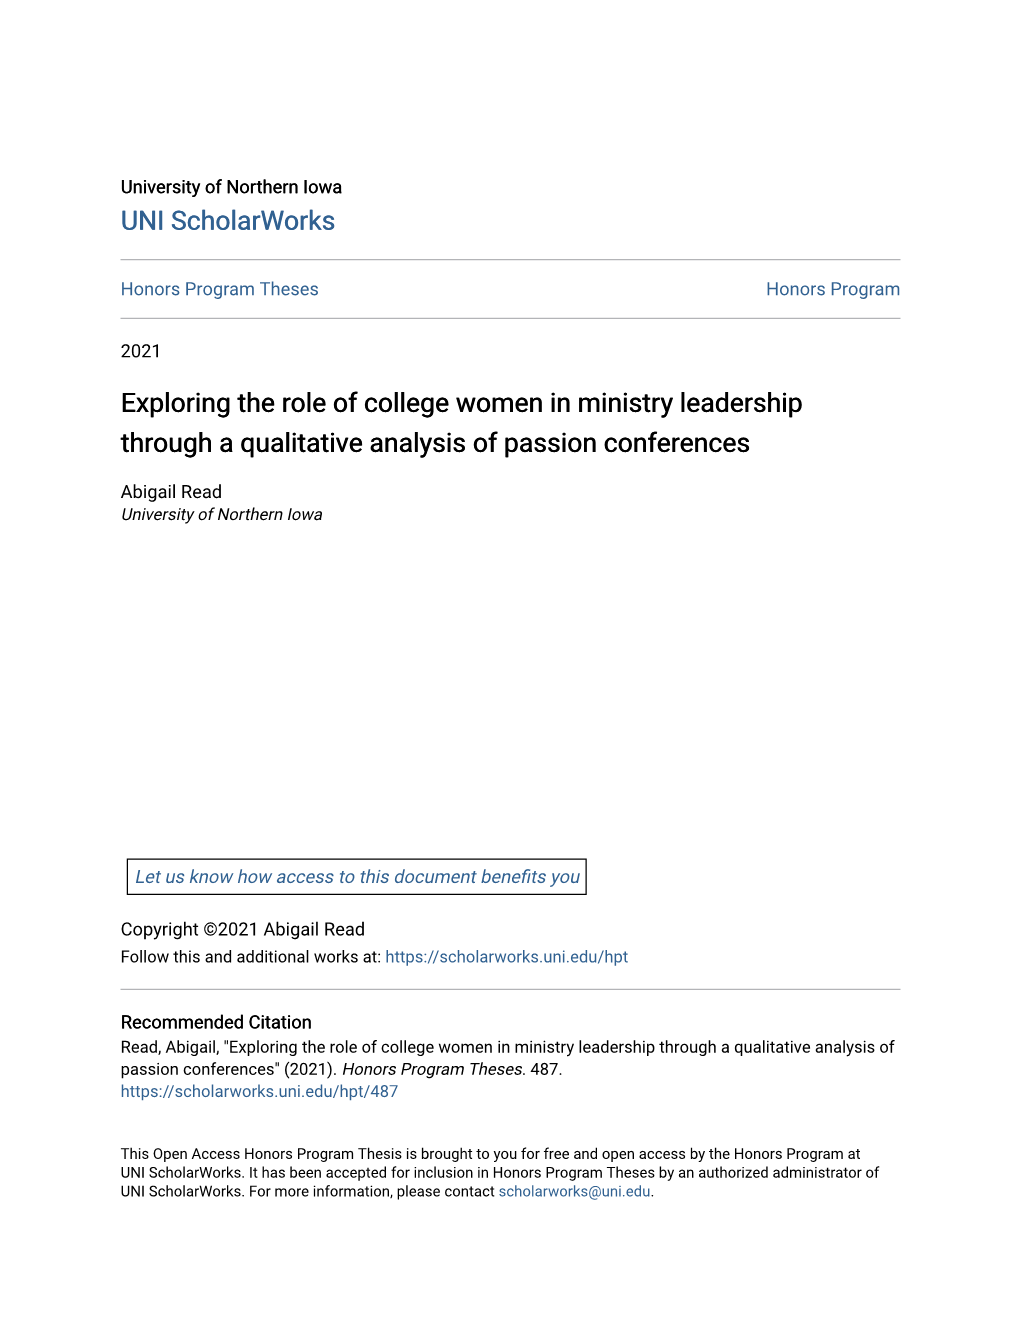 Exploring the Role of College Women in Ministry Leadership Through a Qualitative Analysis of Passion Conferences